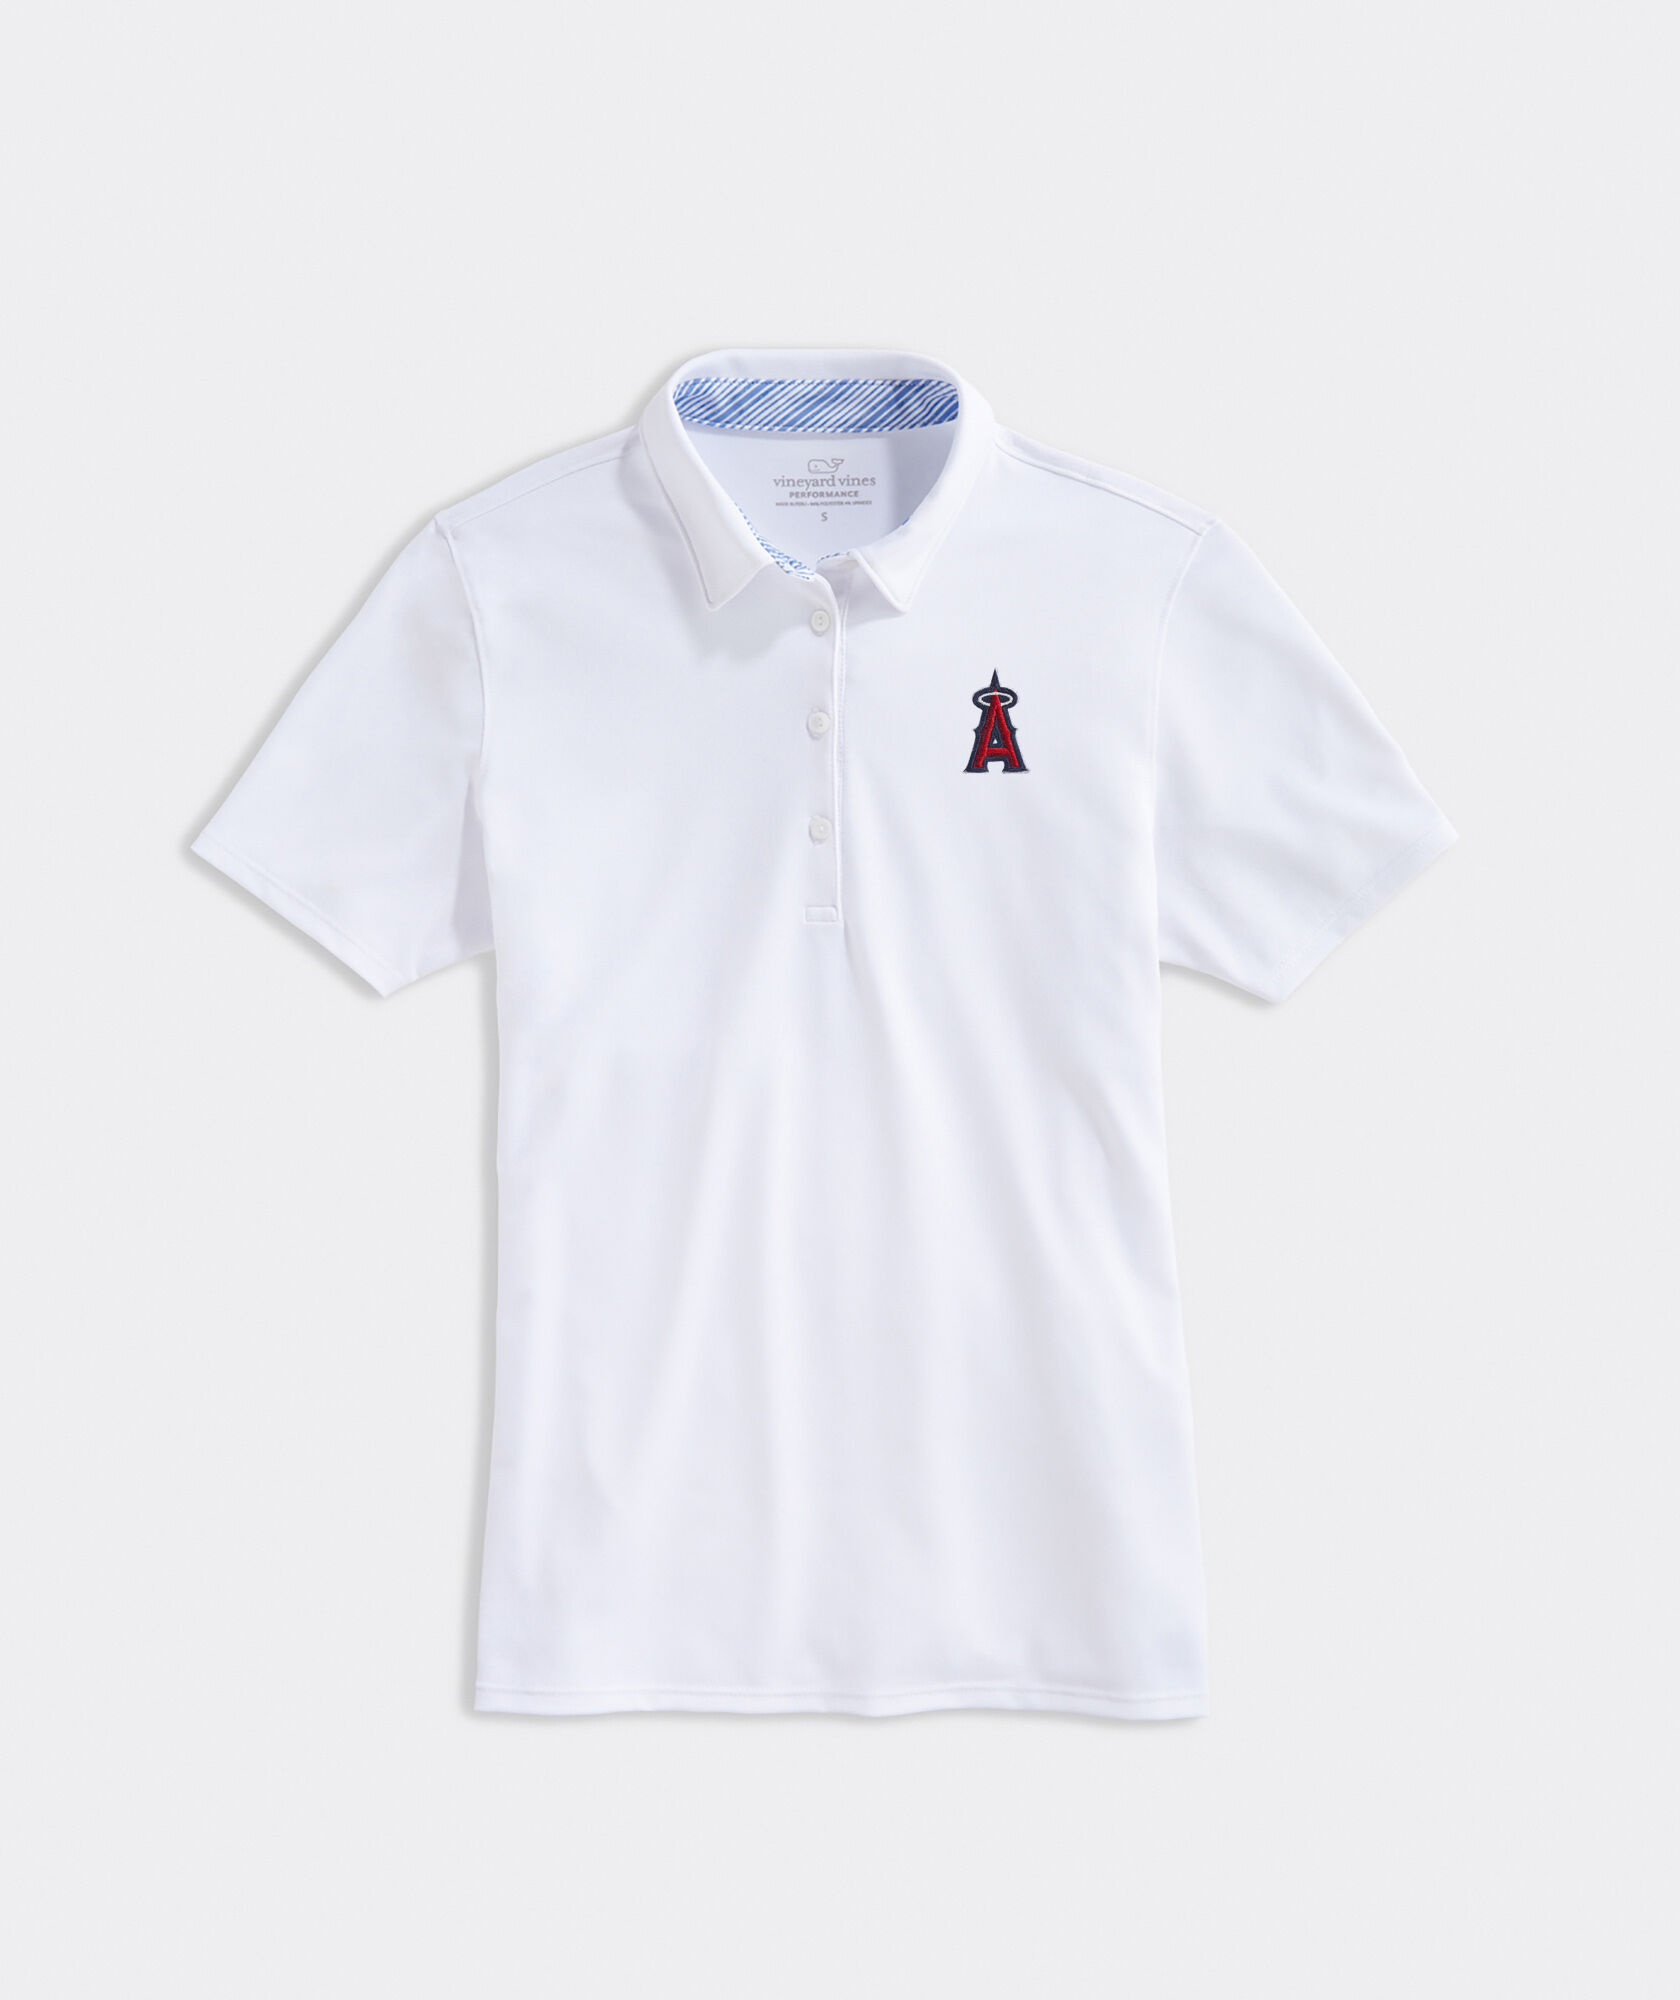 Women's Los Angeles Angels Pique Polo